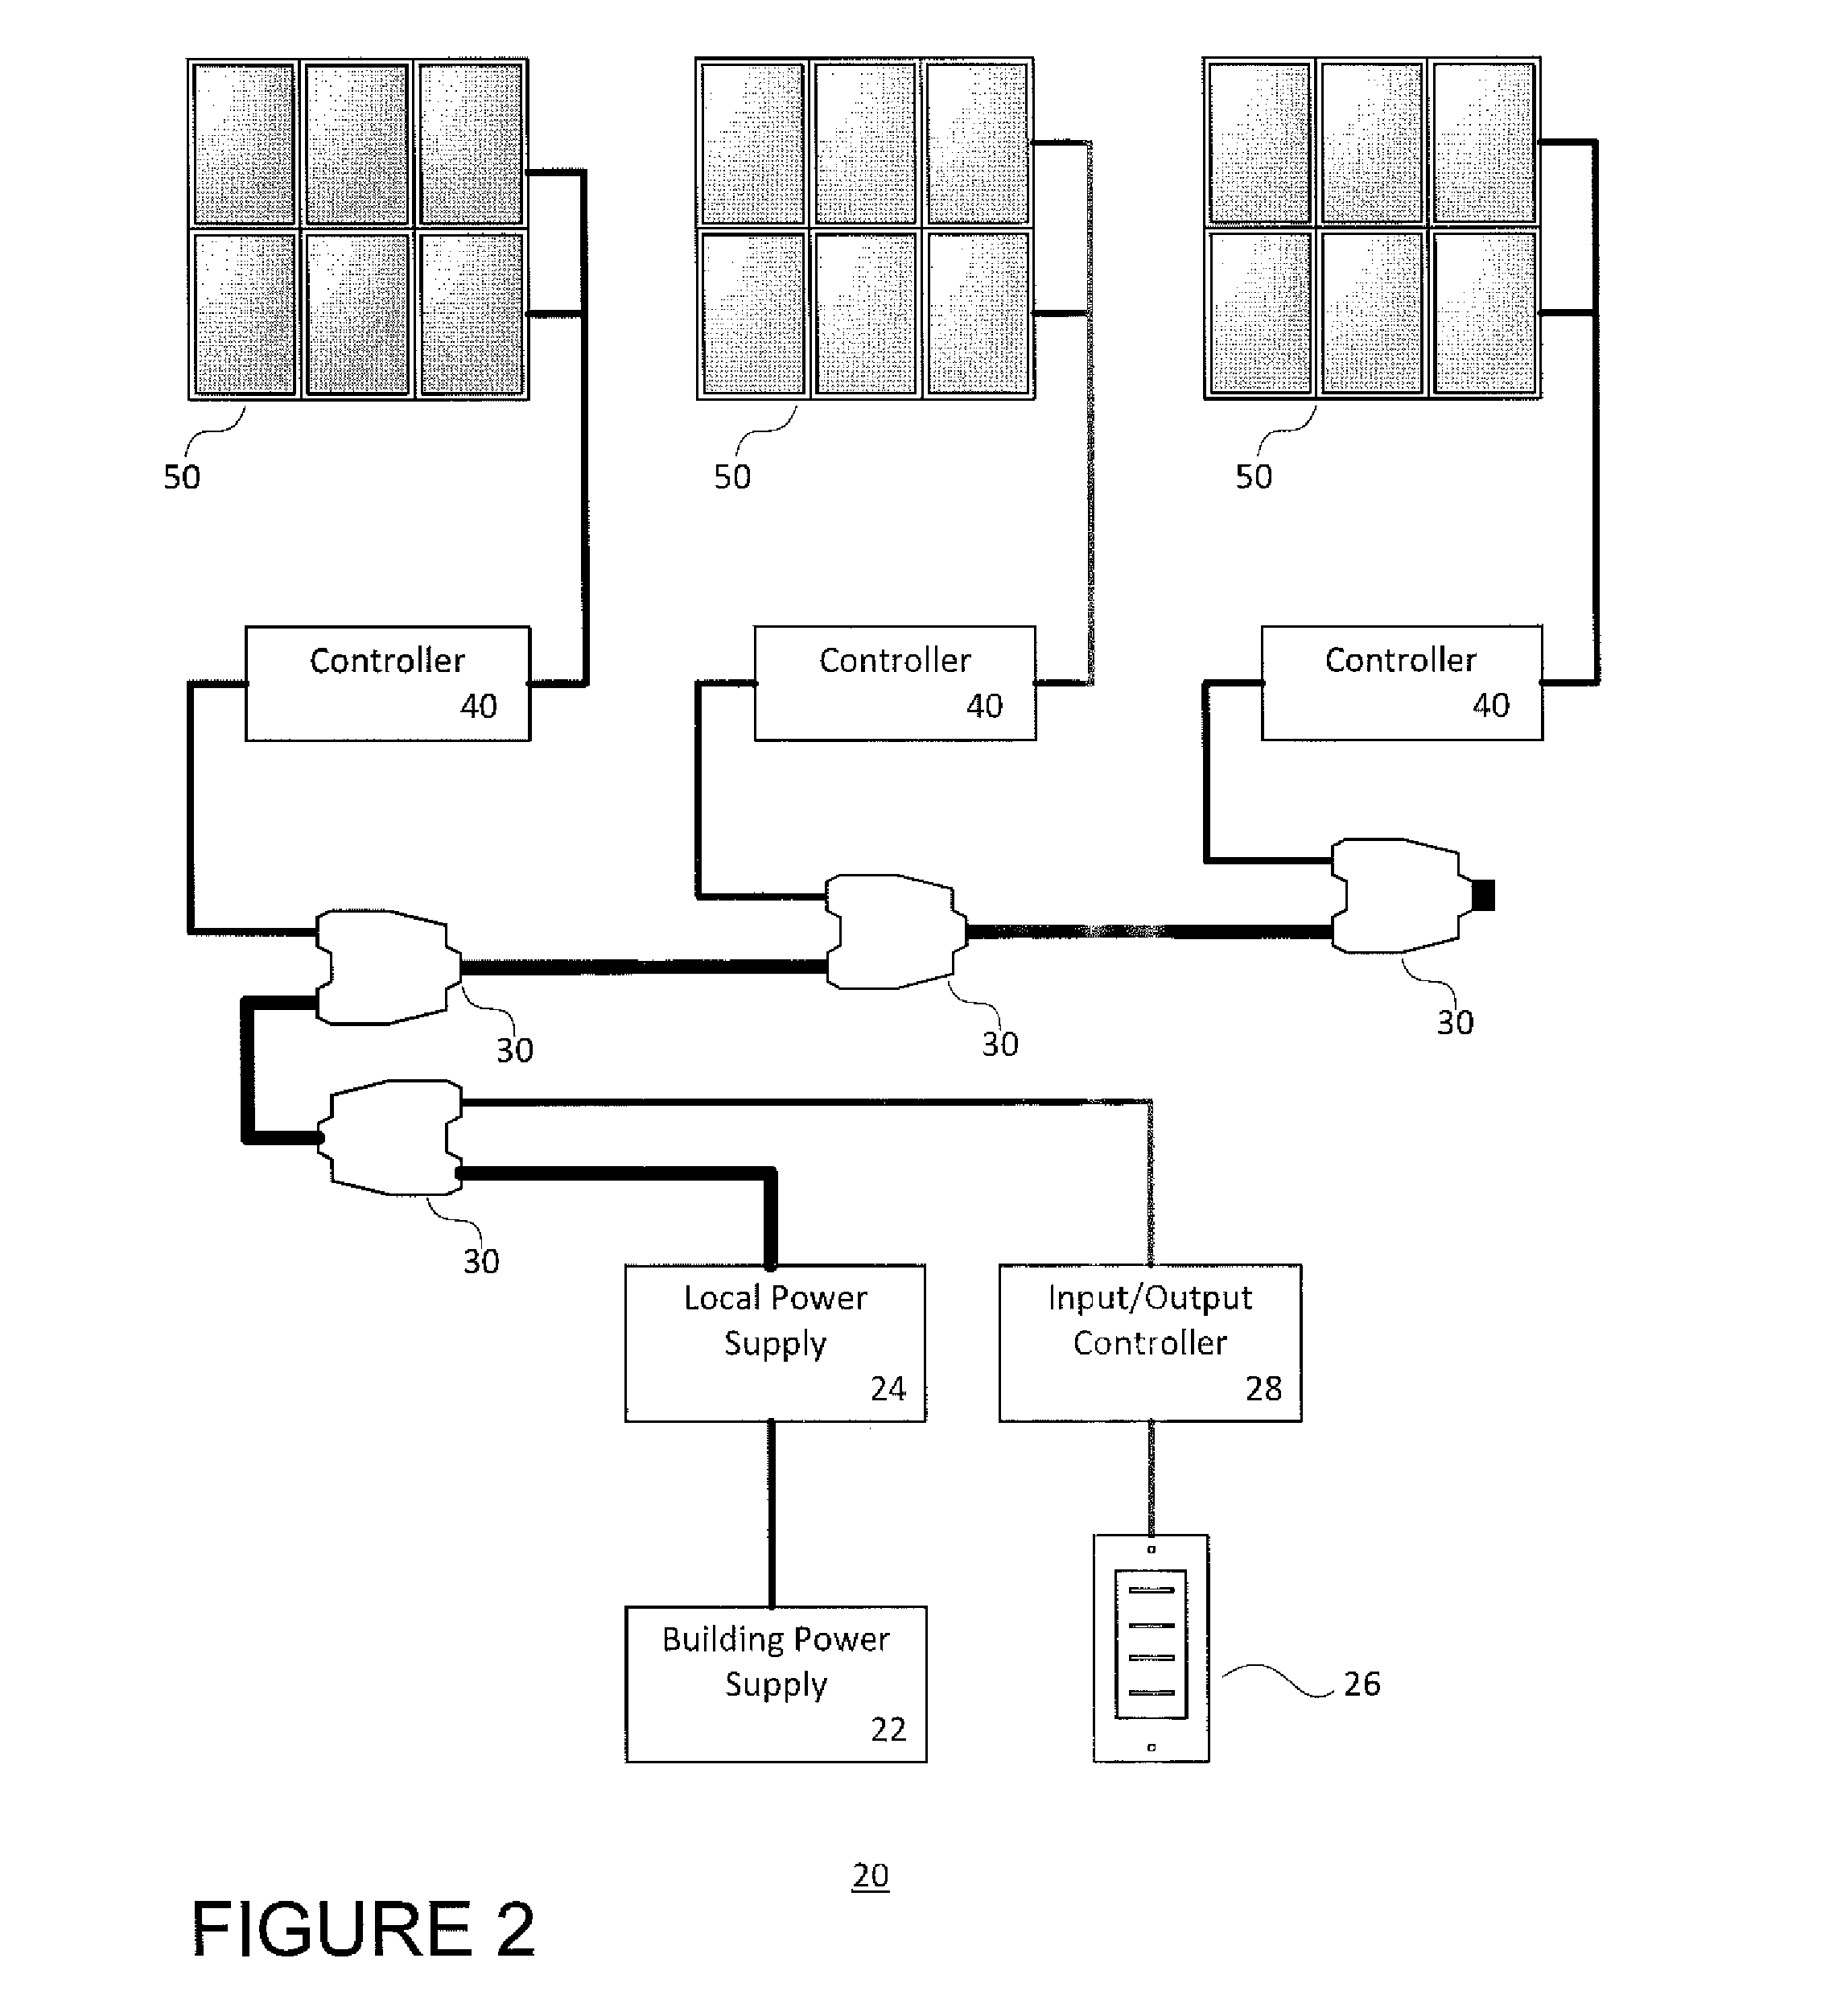 Control system trunk line architecture